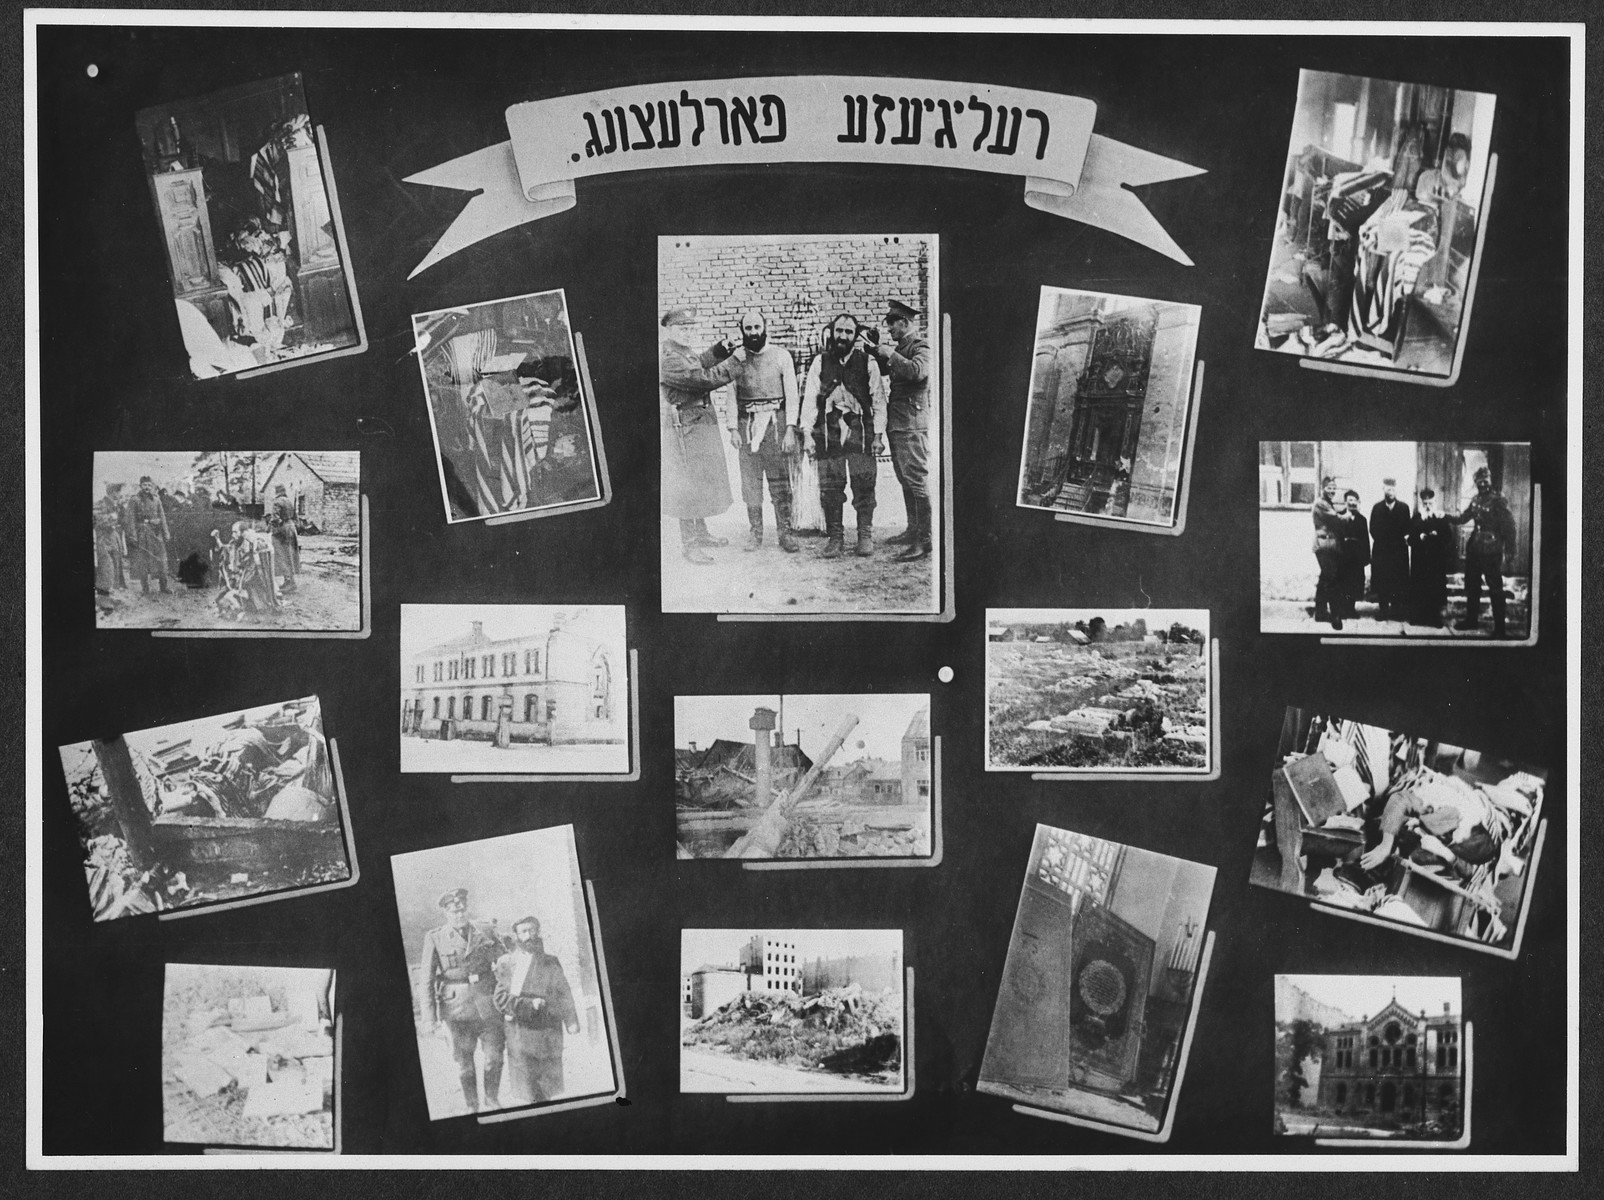 Display panel from a photo exhibition on the Holocaust entitled, "Destruction of Religion" created by photographer George Kaddish in a displaced persons' camp.

The exhibition consisted both of photographs that he shot in the Kovno ghetto as well as other photographs he collected from other ghettos and camps.